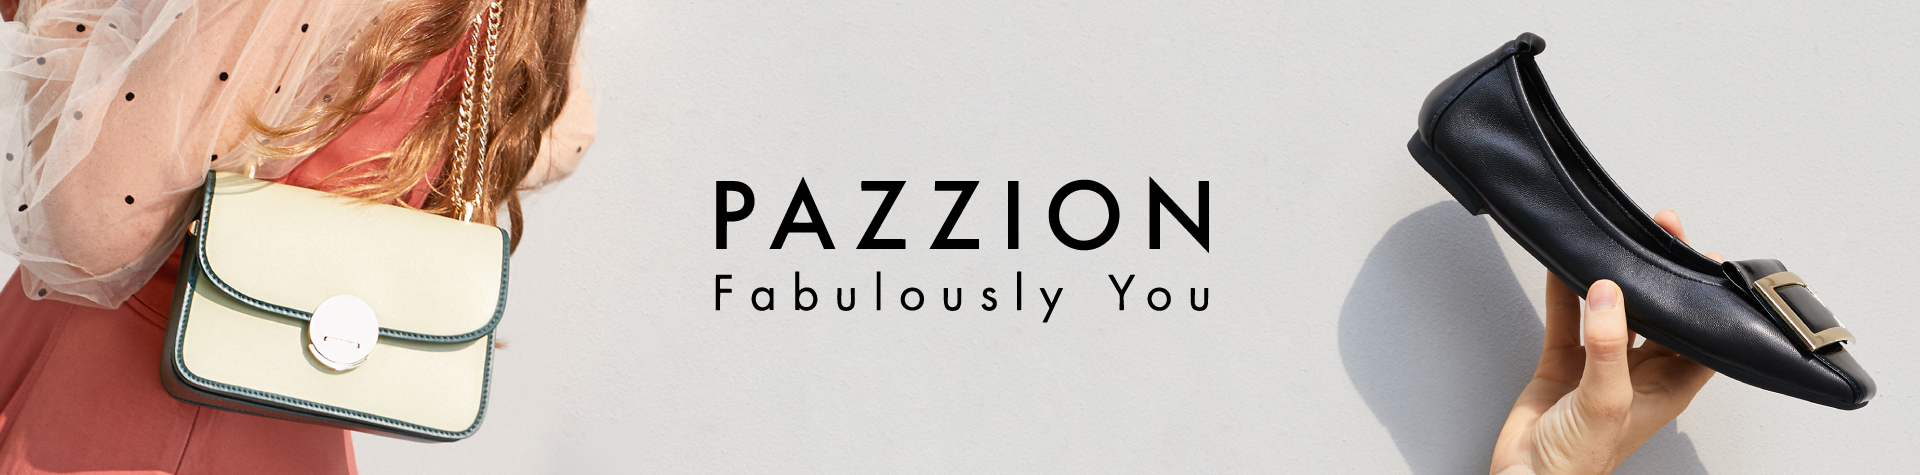 Pazzion Online Store in the Philippines